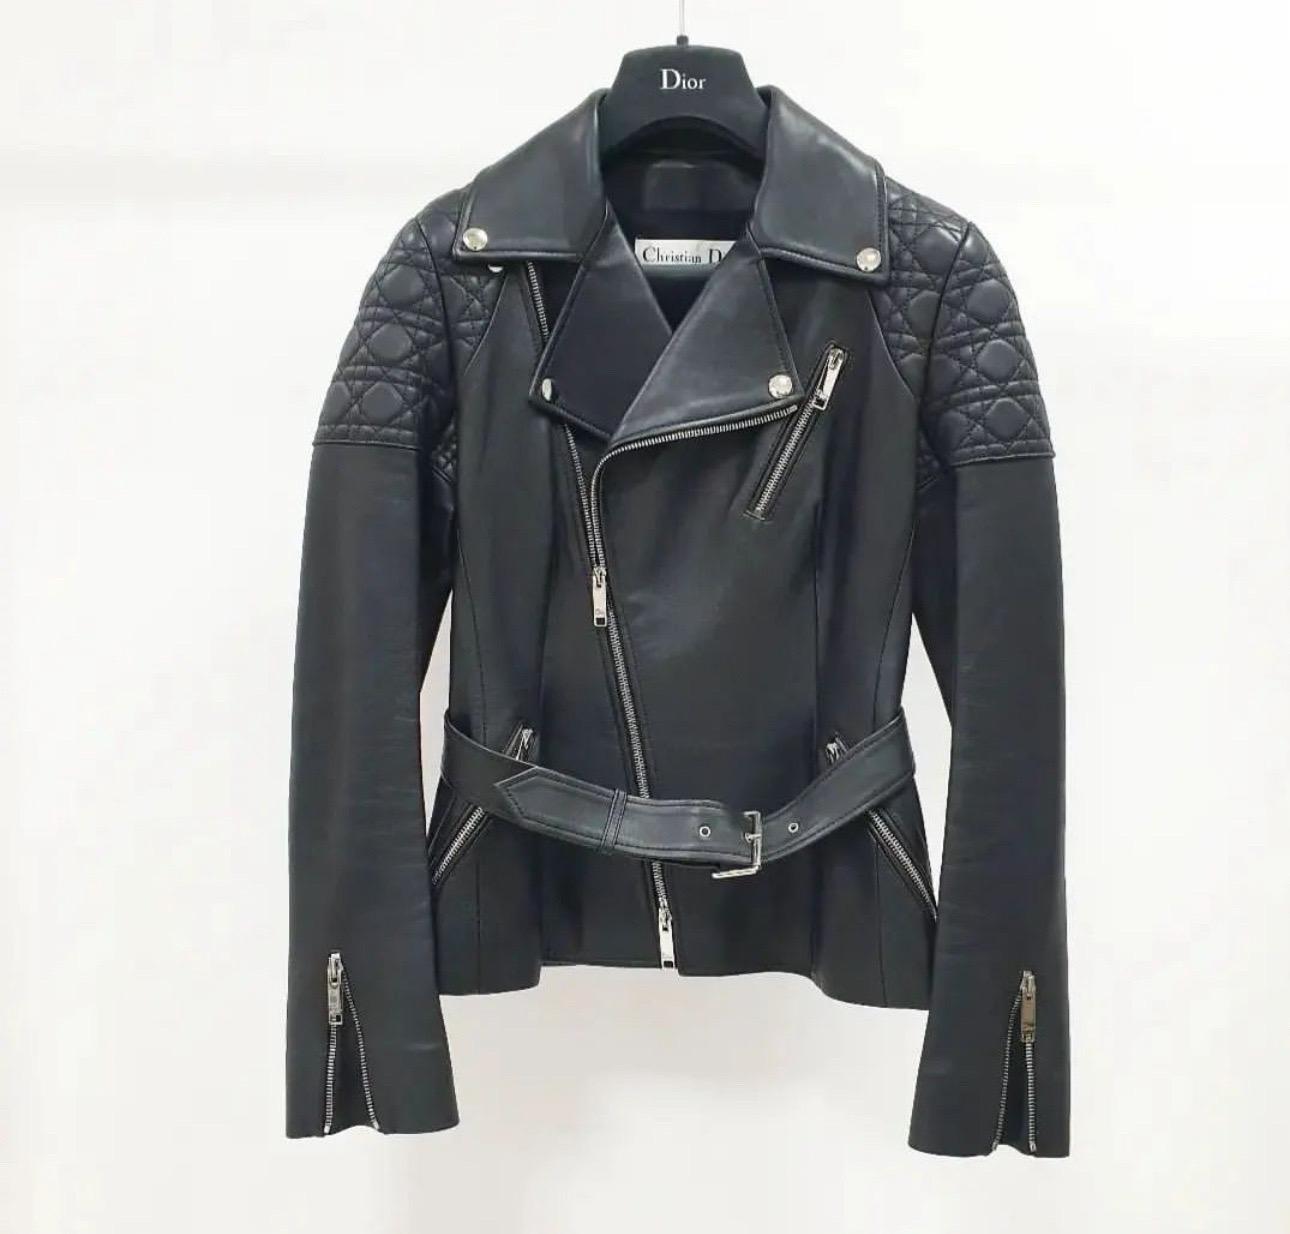 Christian Dior Black Leather Belted Jacket  In Good Condition For Sale In Krakow, PL